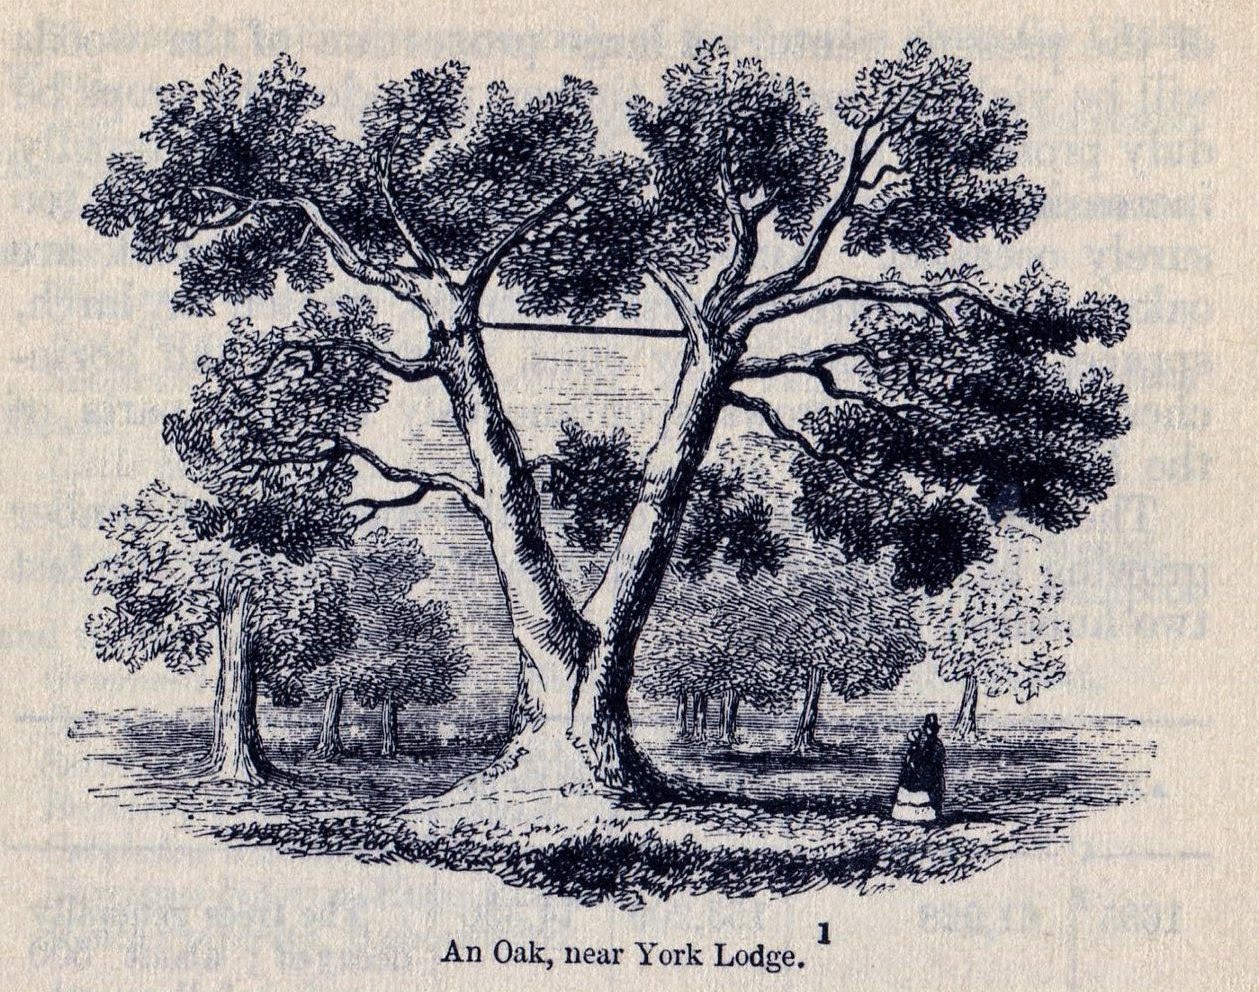 the only surviving image of the tree showing the brace